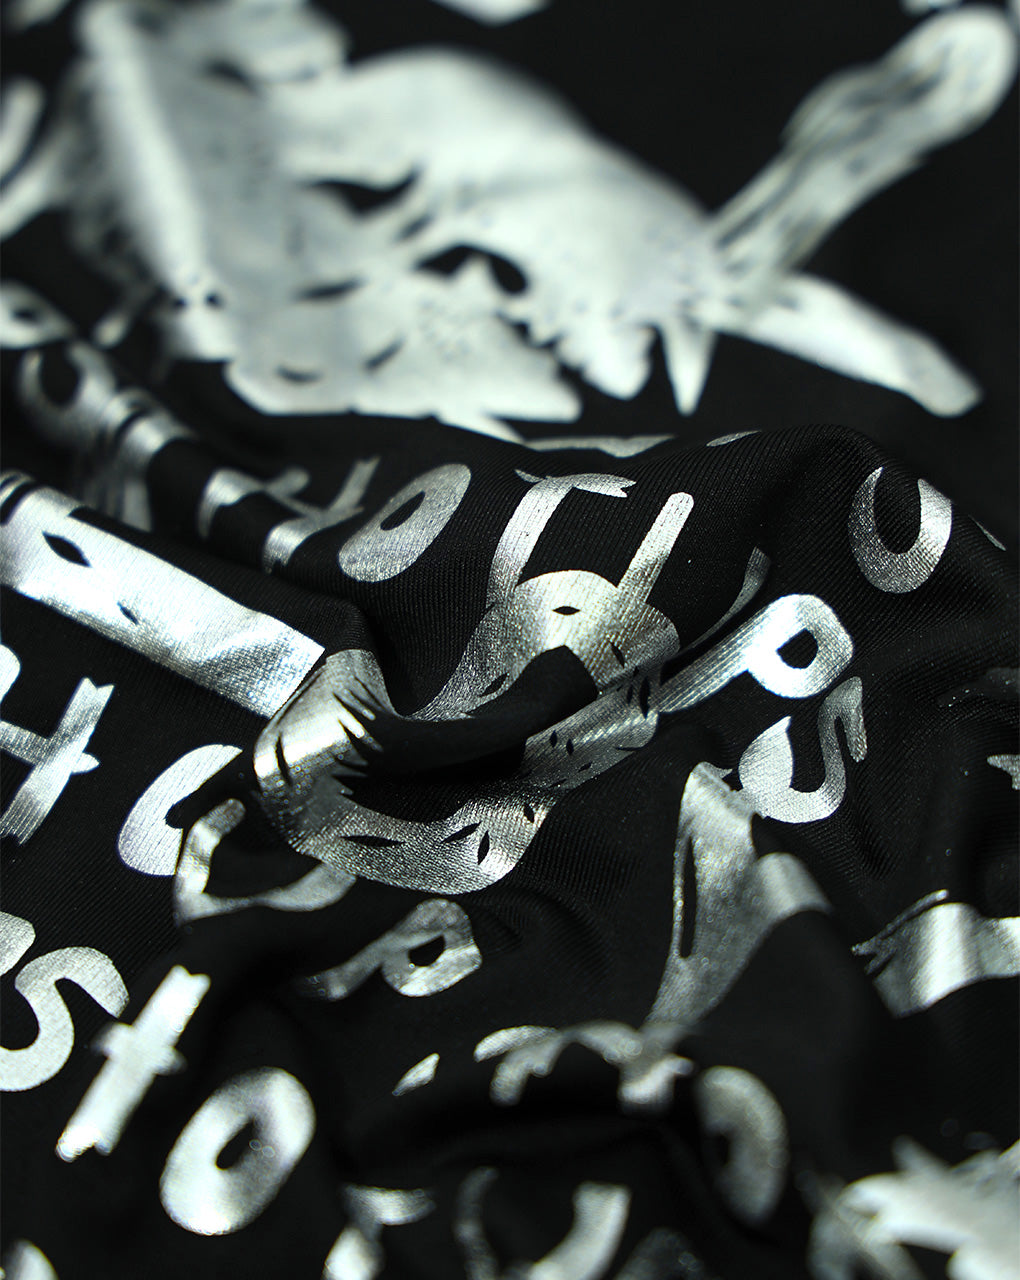 BLACK & SILVER POLYESTER KNITTED FOIL FABRIC